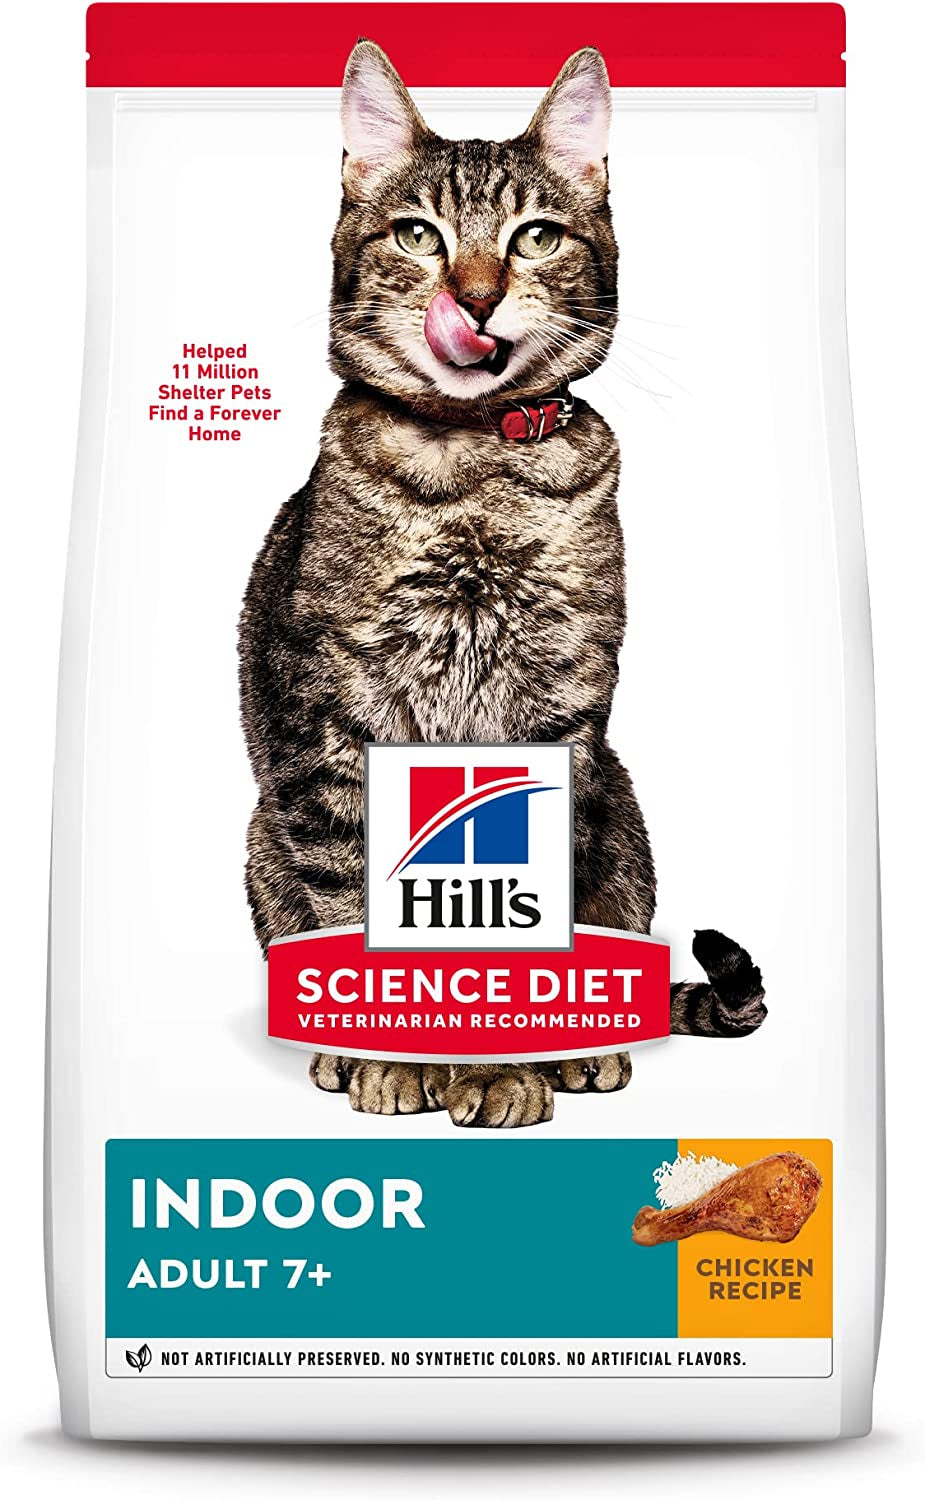 Hill'S Science Diet Dry Cat Food, Adult 7+ for Senior Cats, Indoor, Chicken Recipe, 7 Lb. Bag